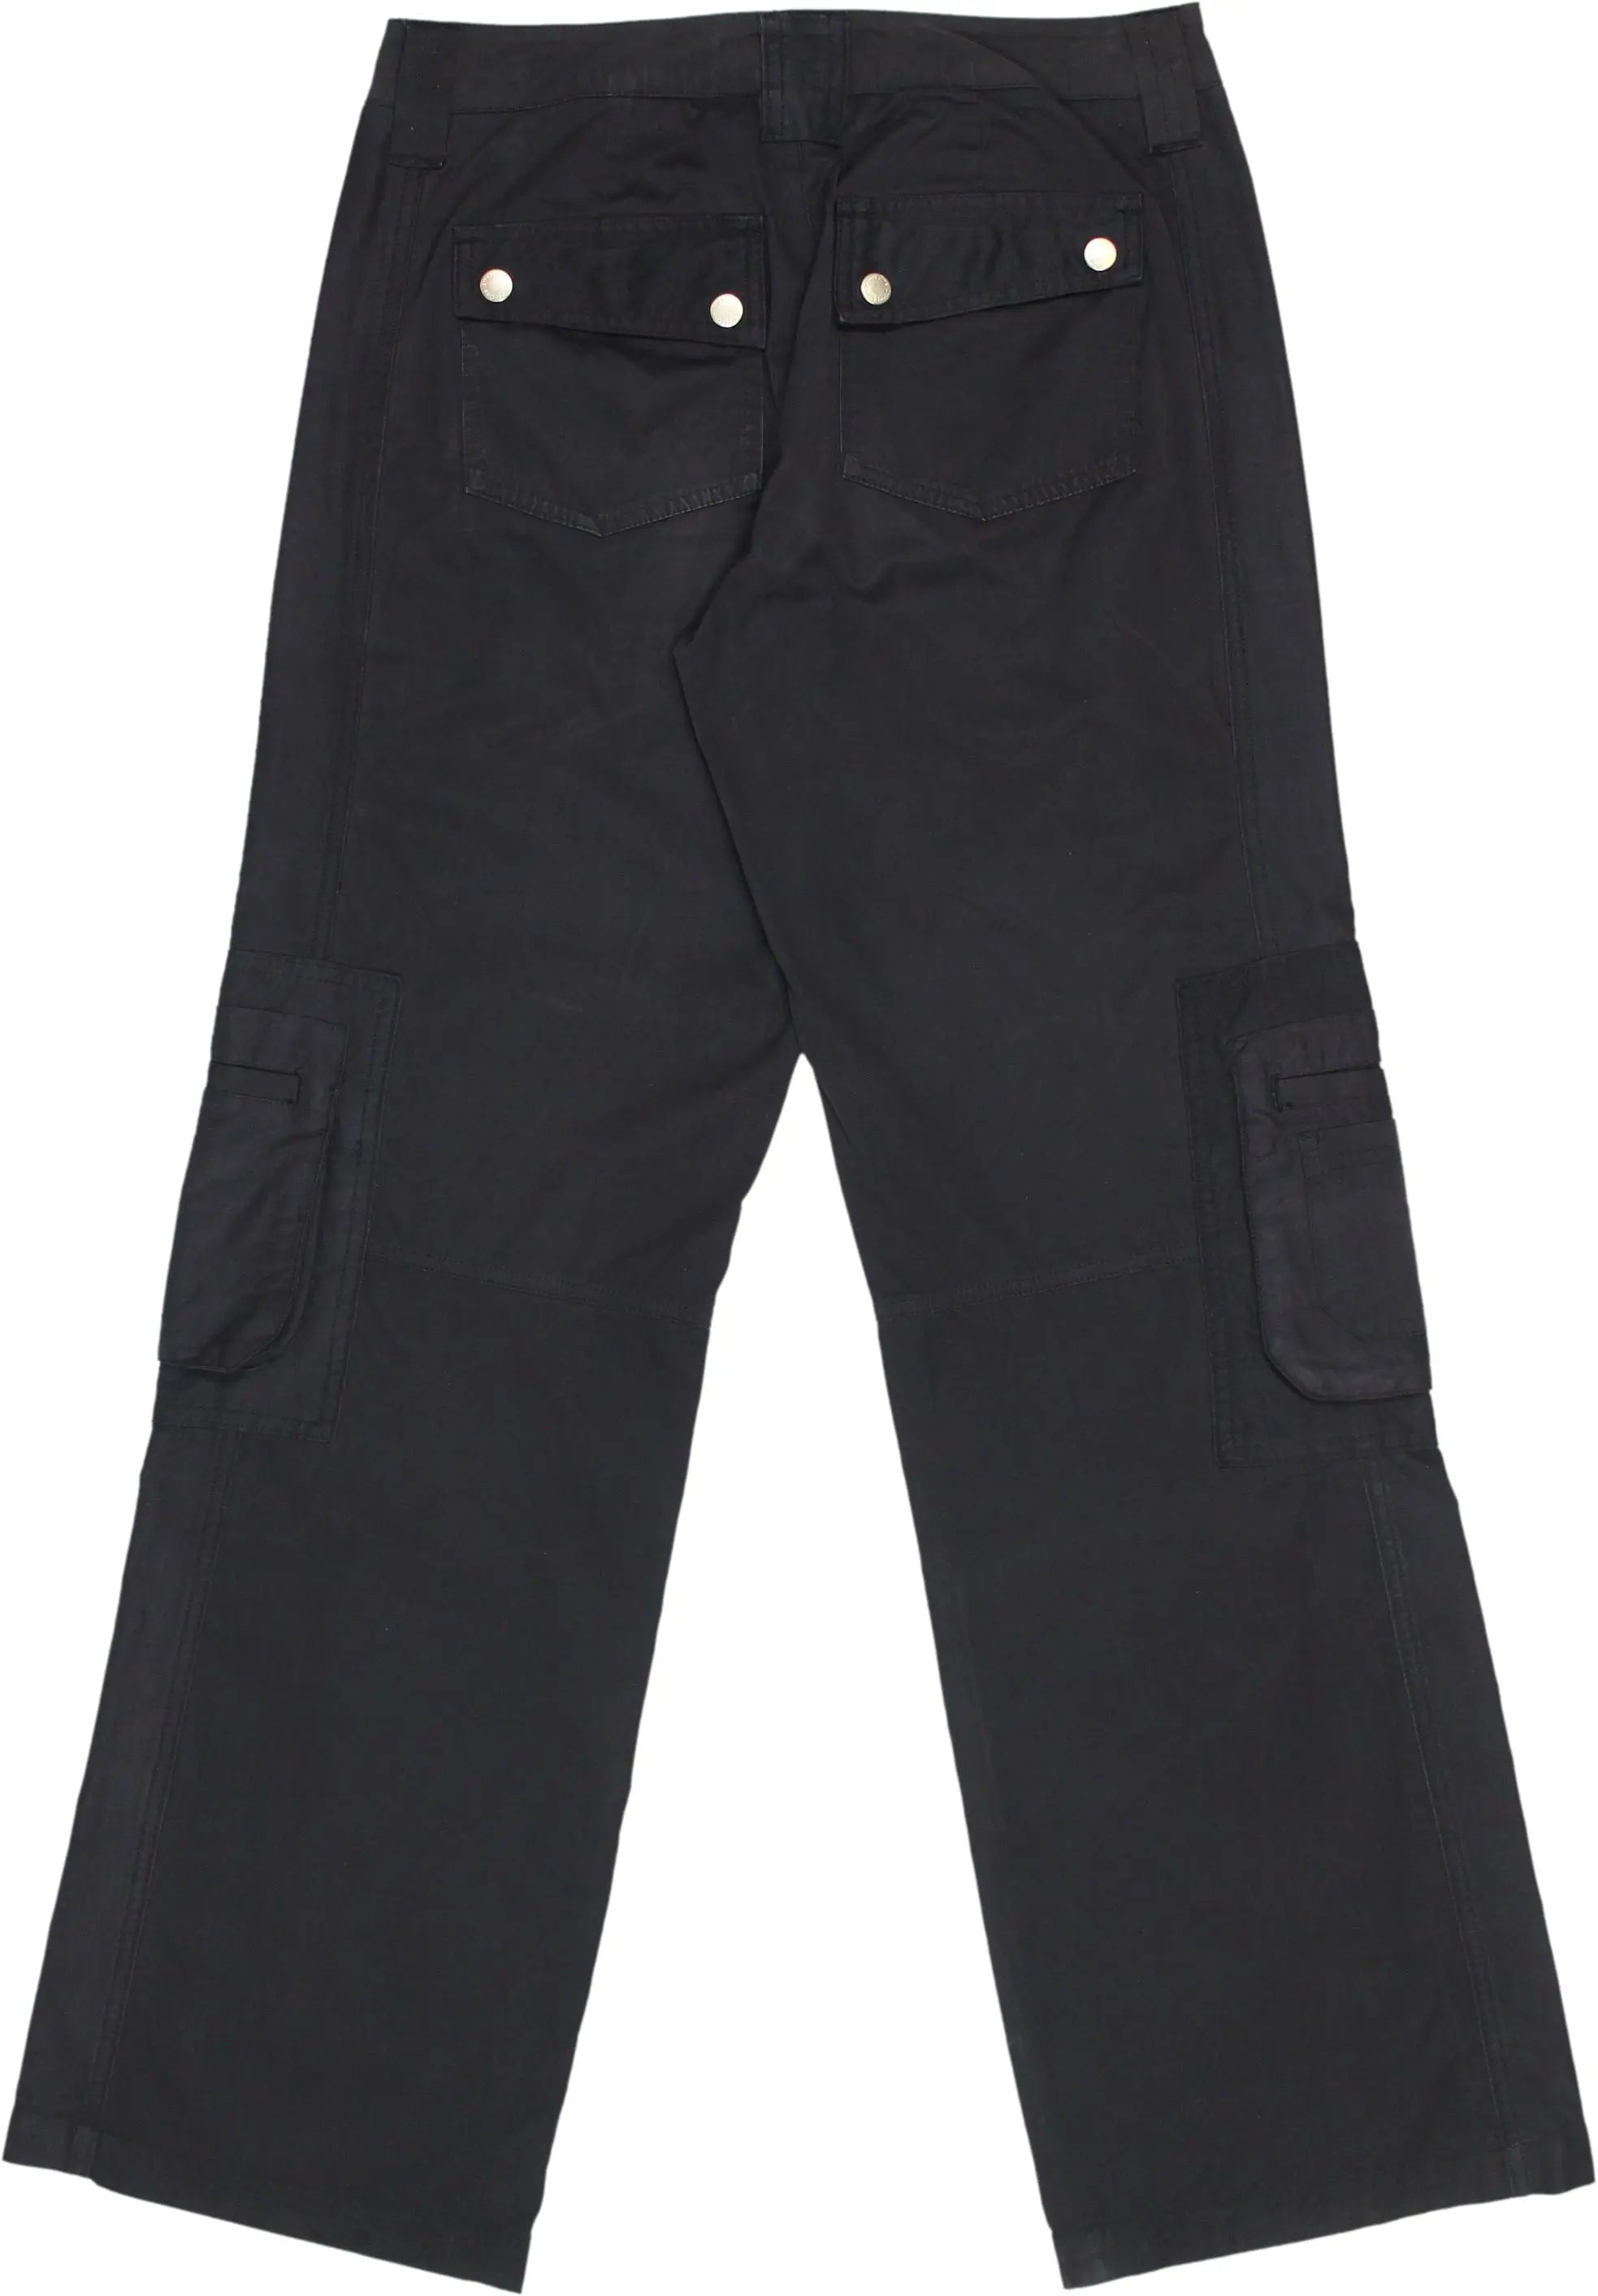 Street One - 00s Black Cargo Pants- ThriftTale.com - Vintage and second handclothing